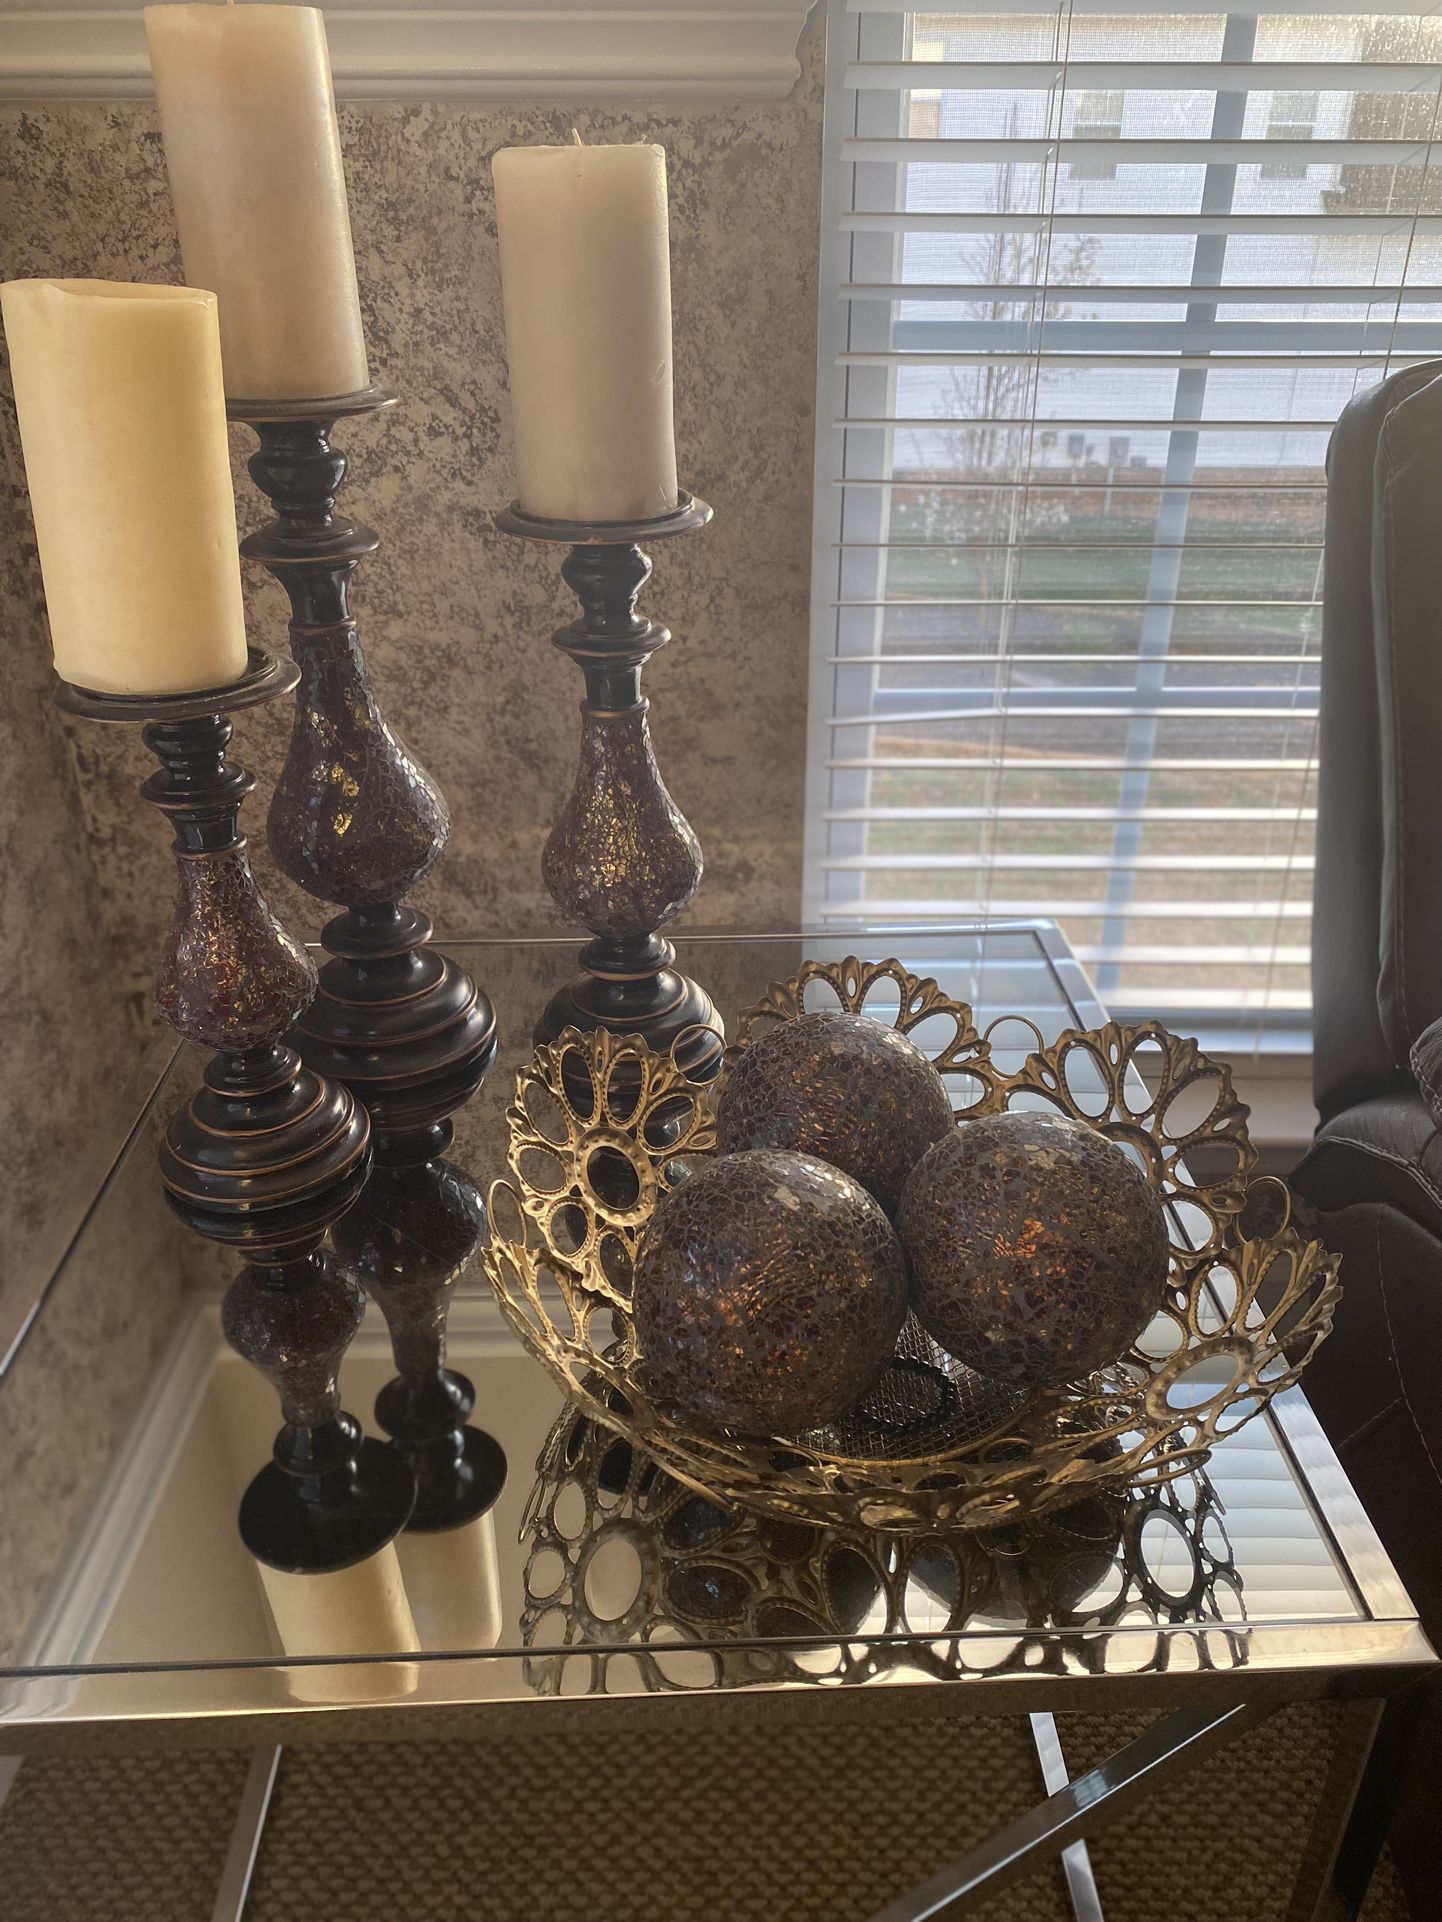 The Candle Holder And  Balls